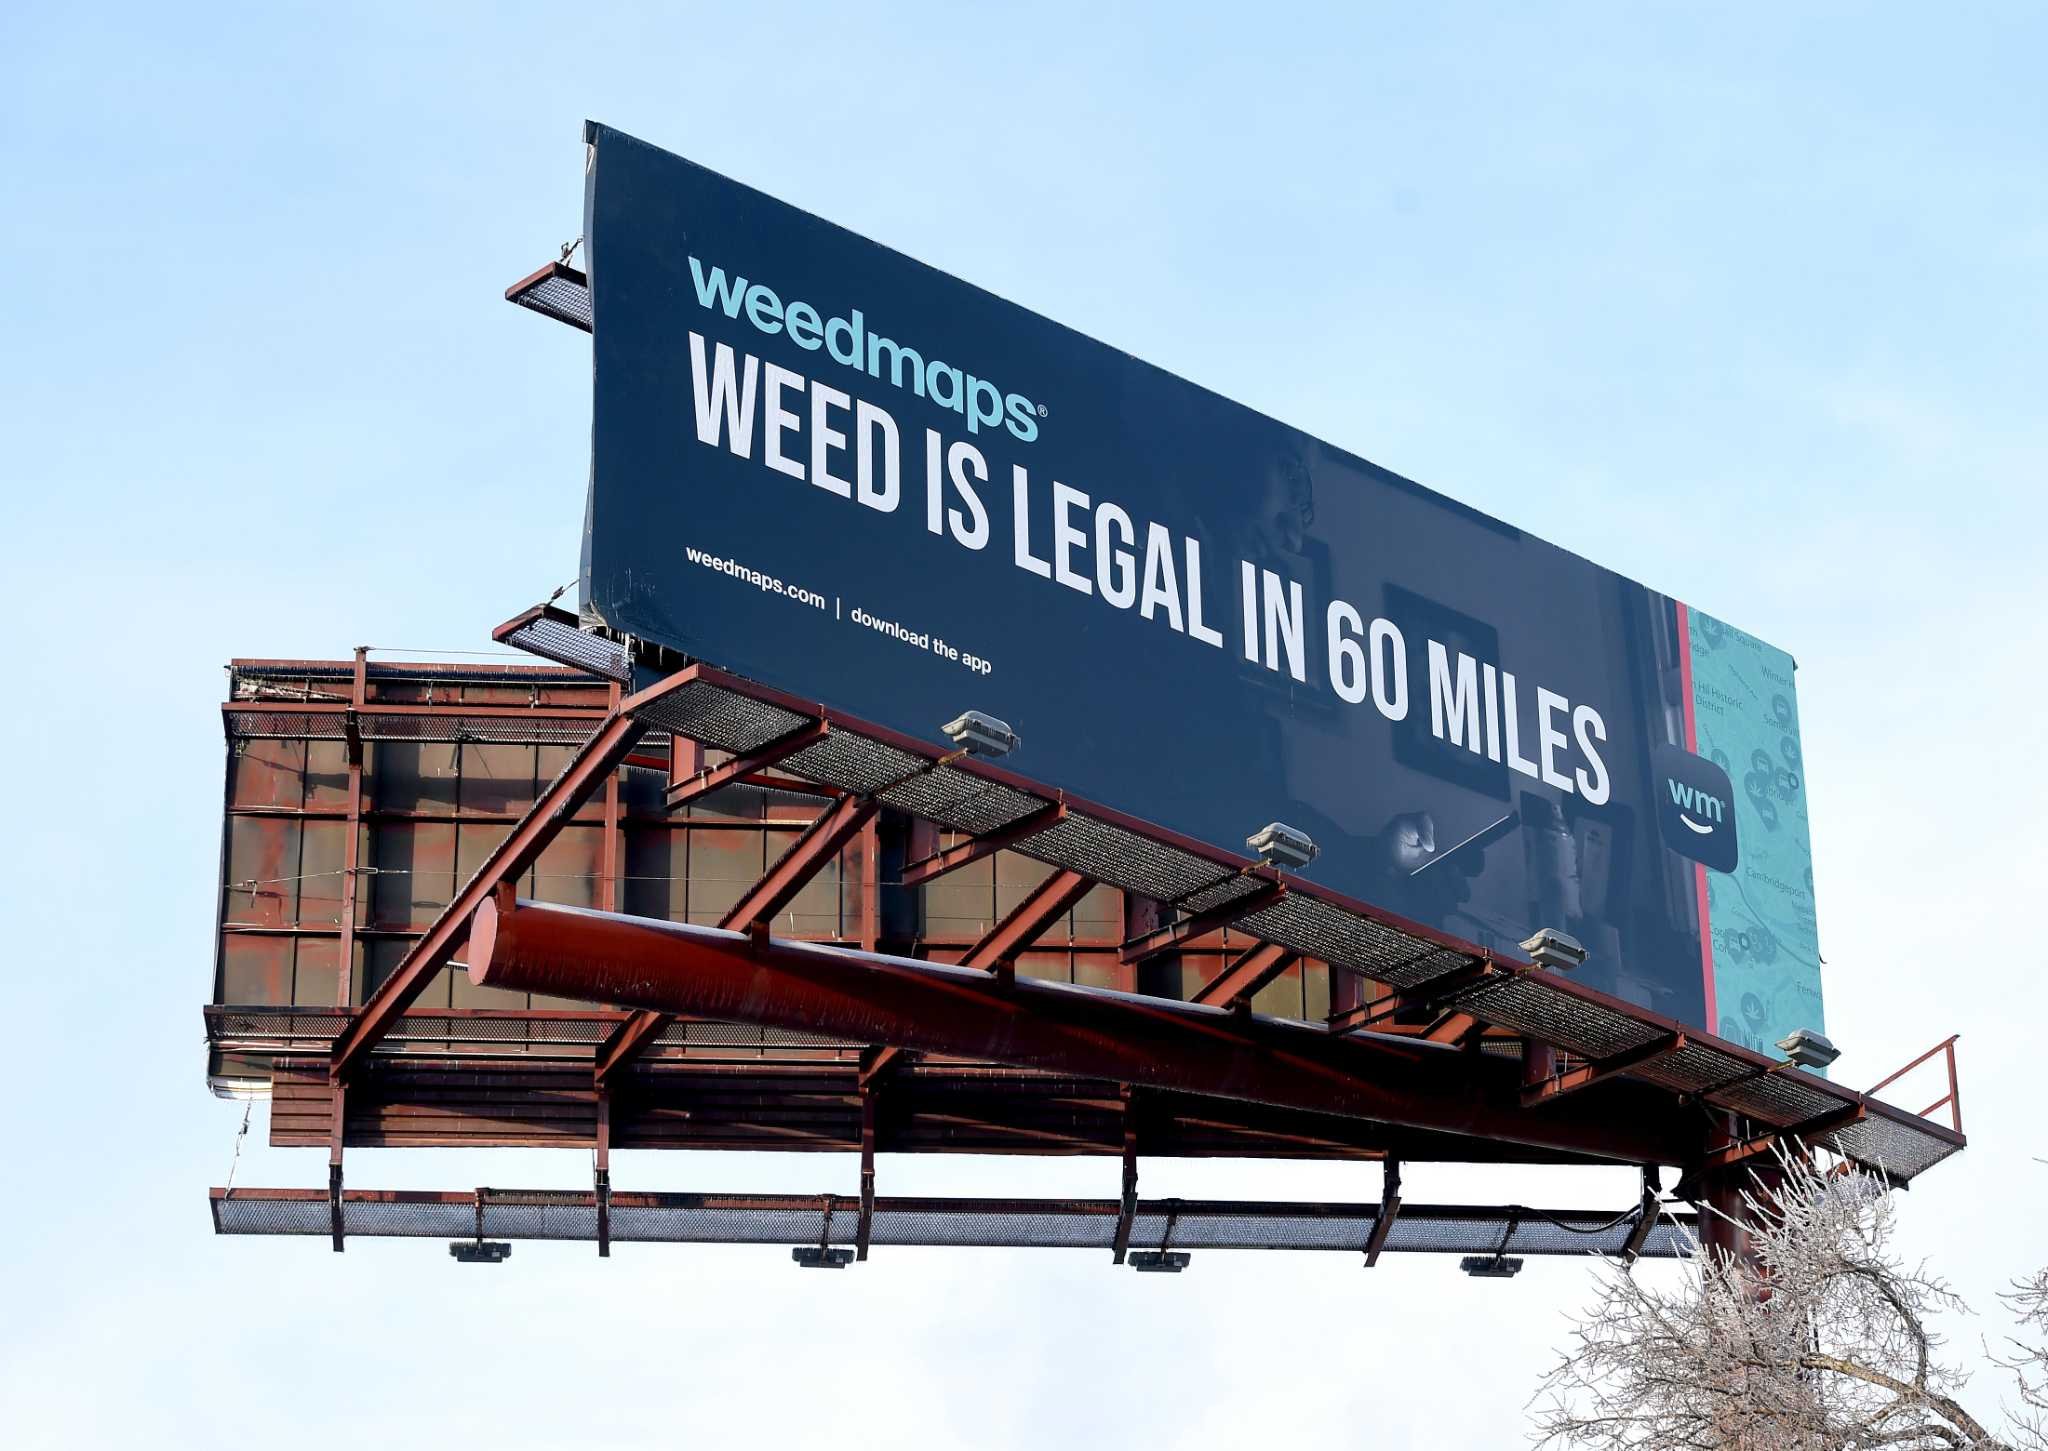 Weedmaps put up a billboard in Connecticut, close to the Massachusetts border, that says, "Weed is legal in 60 miles."